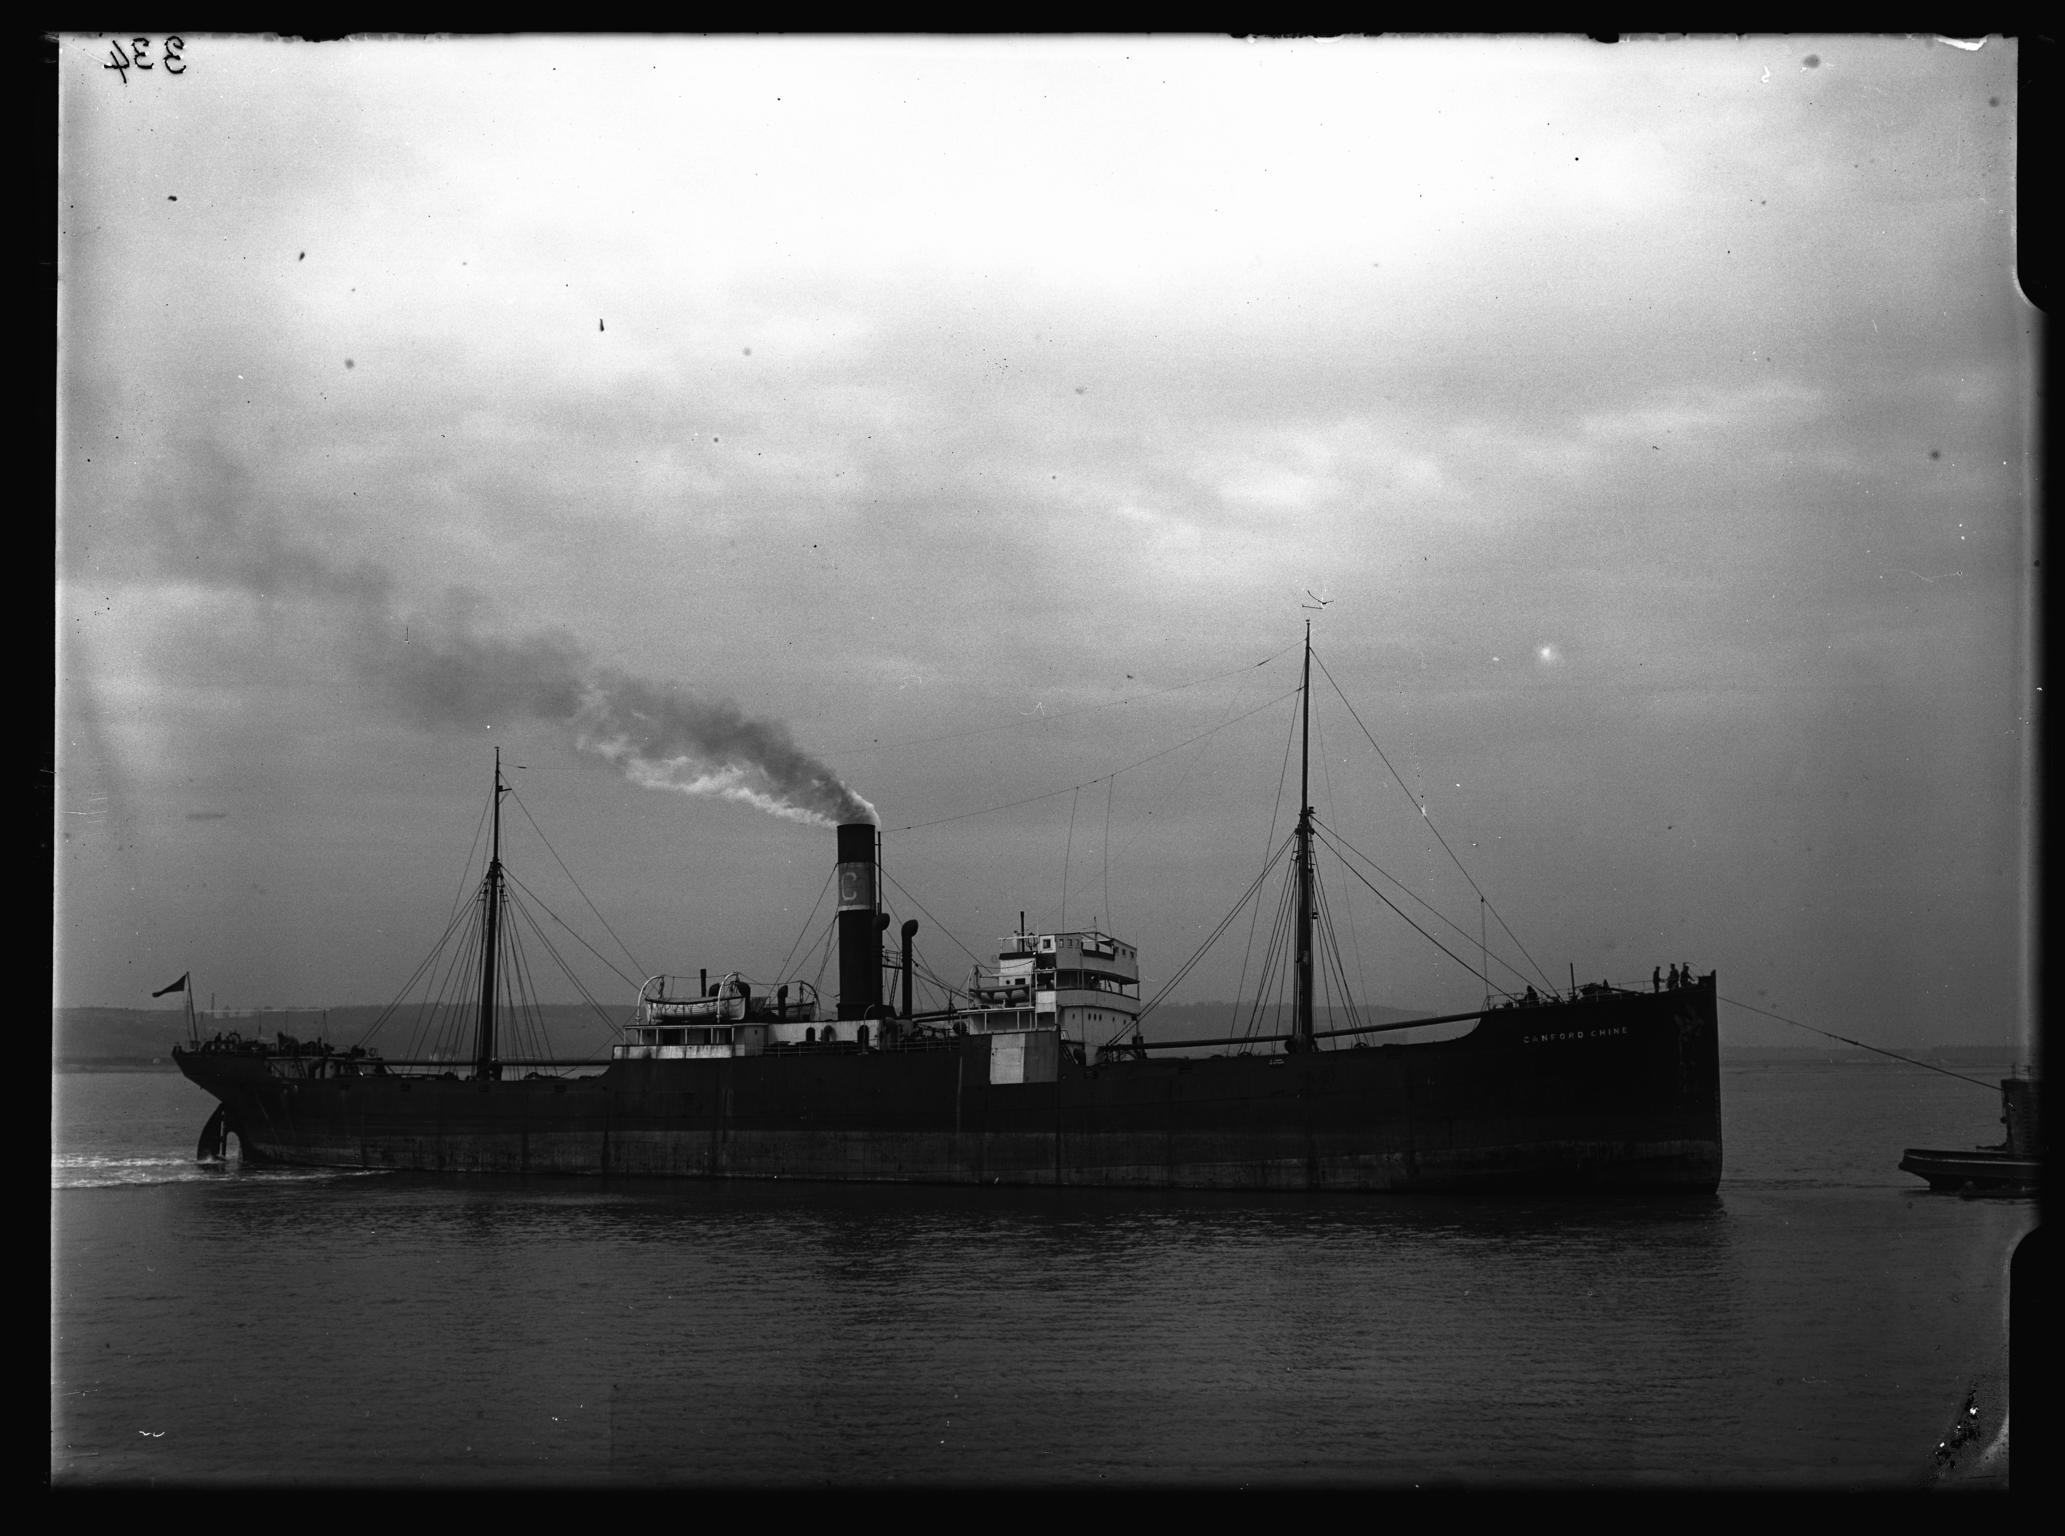 S.S. CANFORD CHINE, glass negative